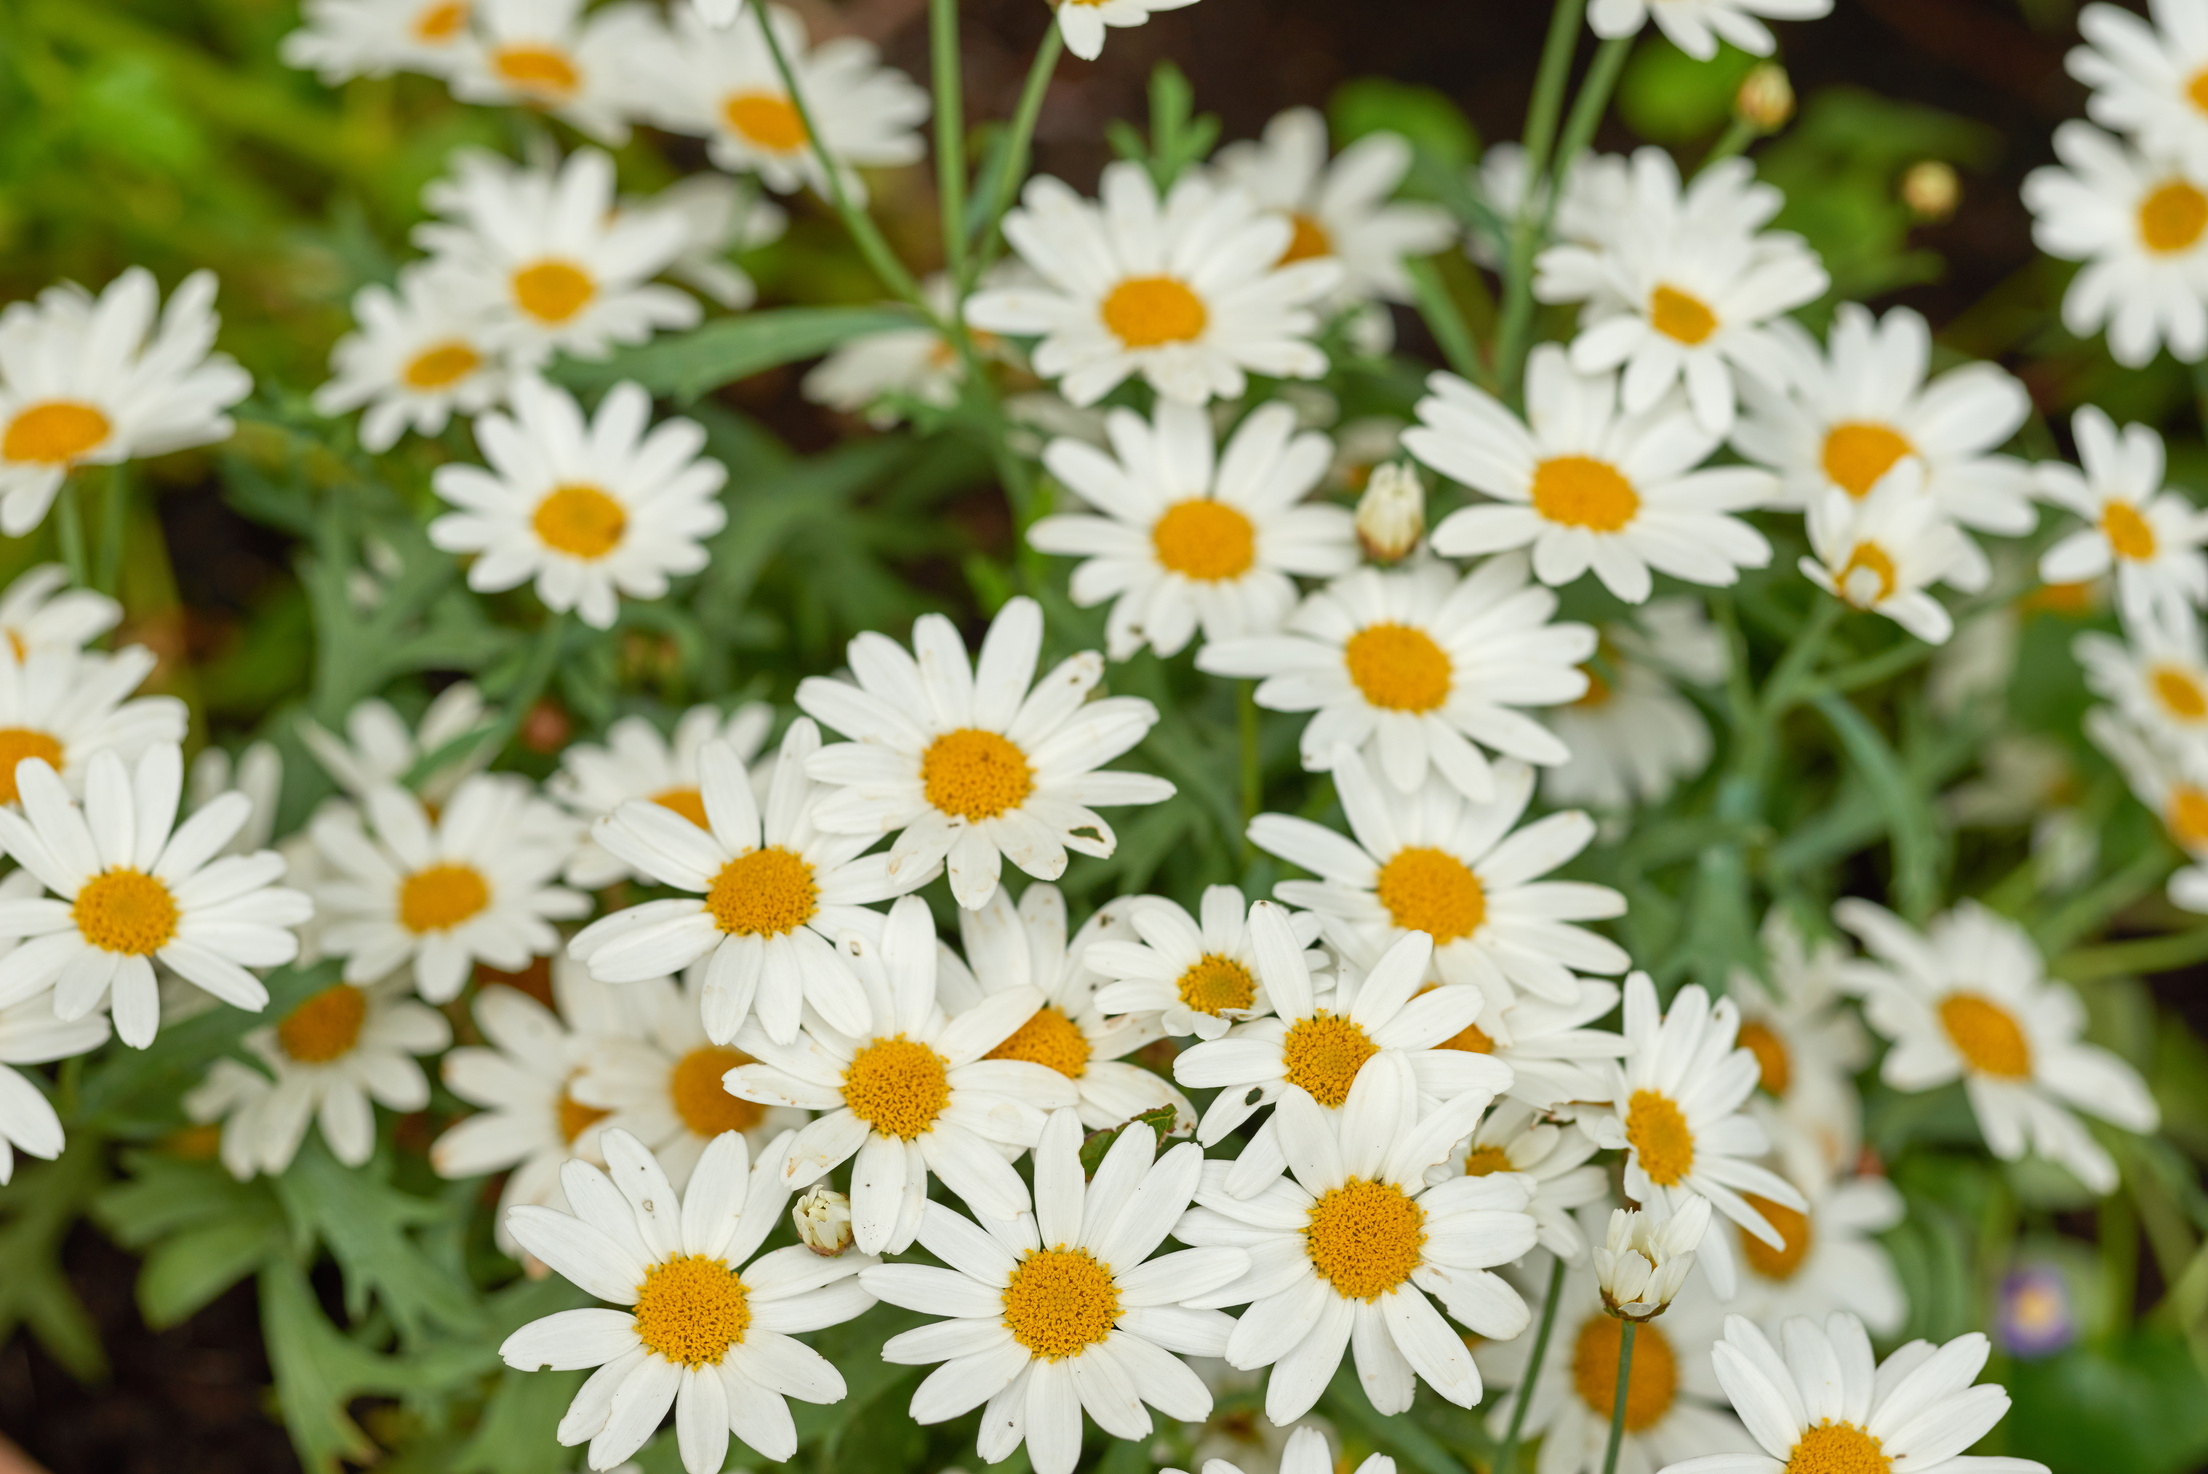 German Chamomile White Daisy Flowers with Yellow Center Blooming